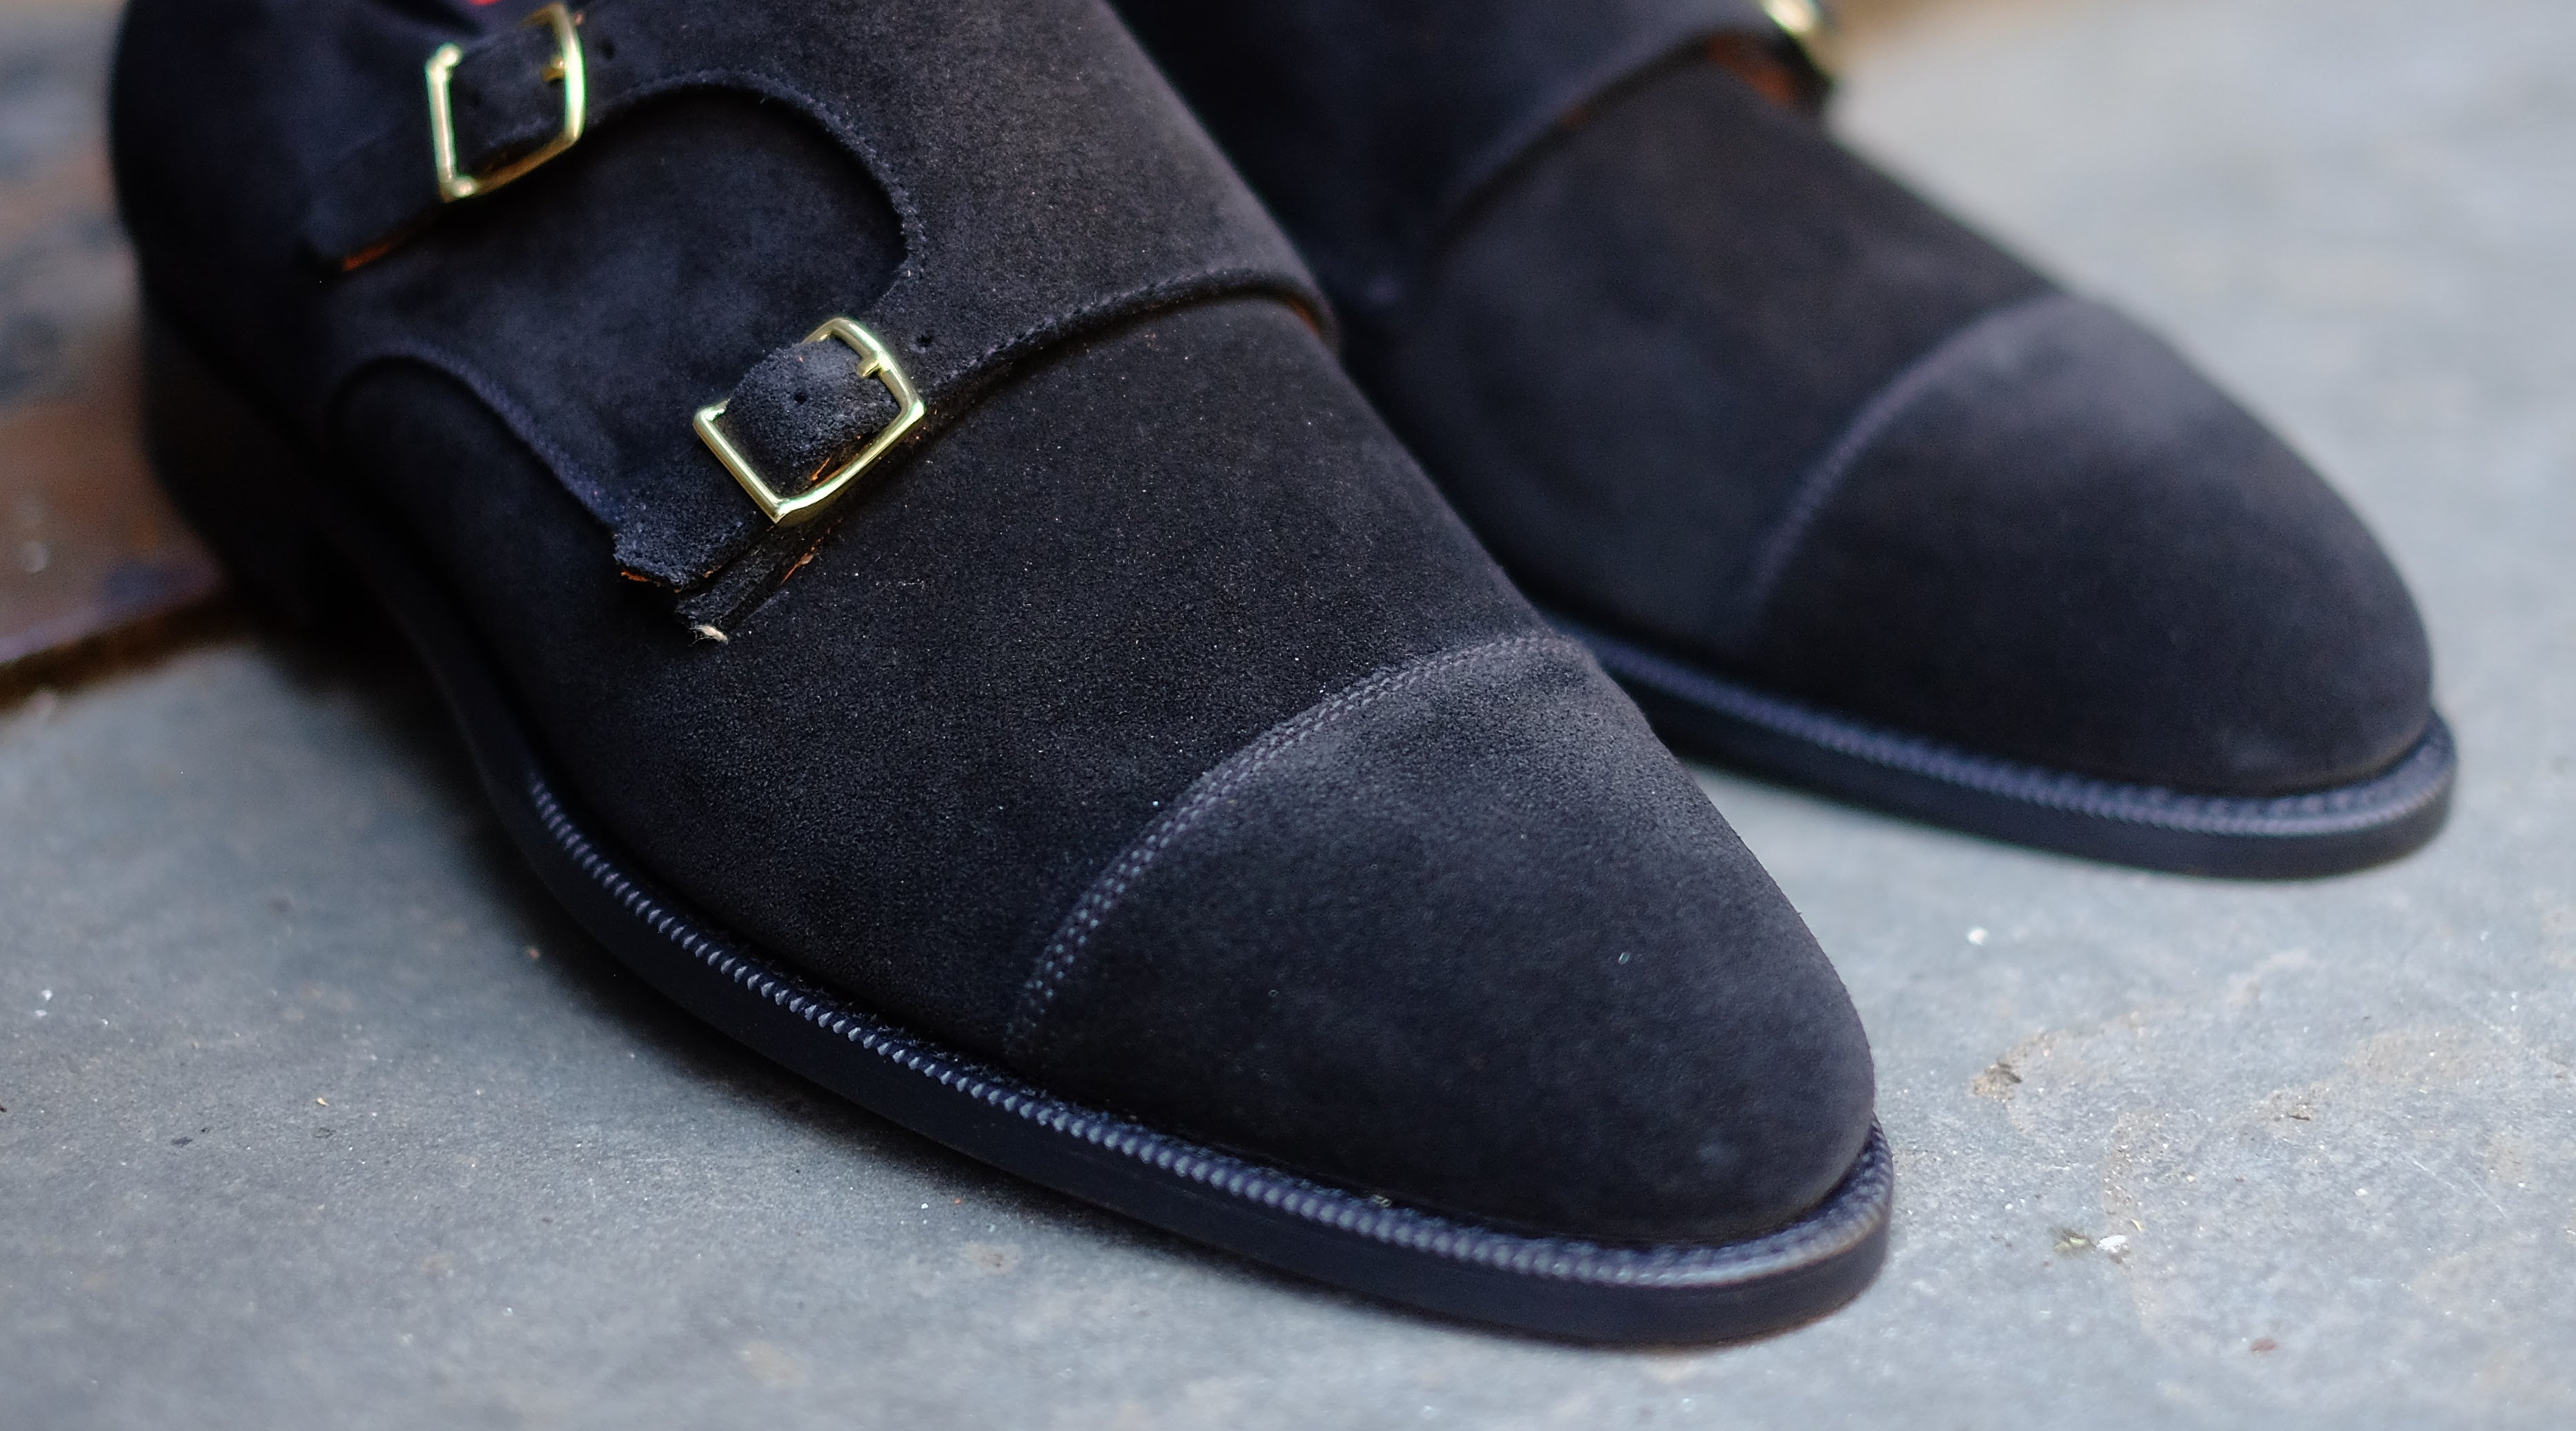 Why Don't We See Black Suede More Often?